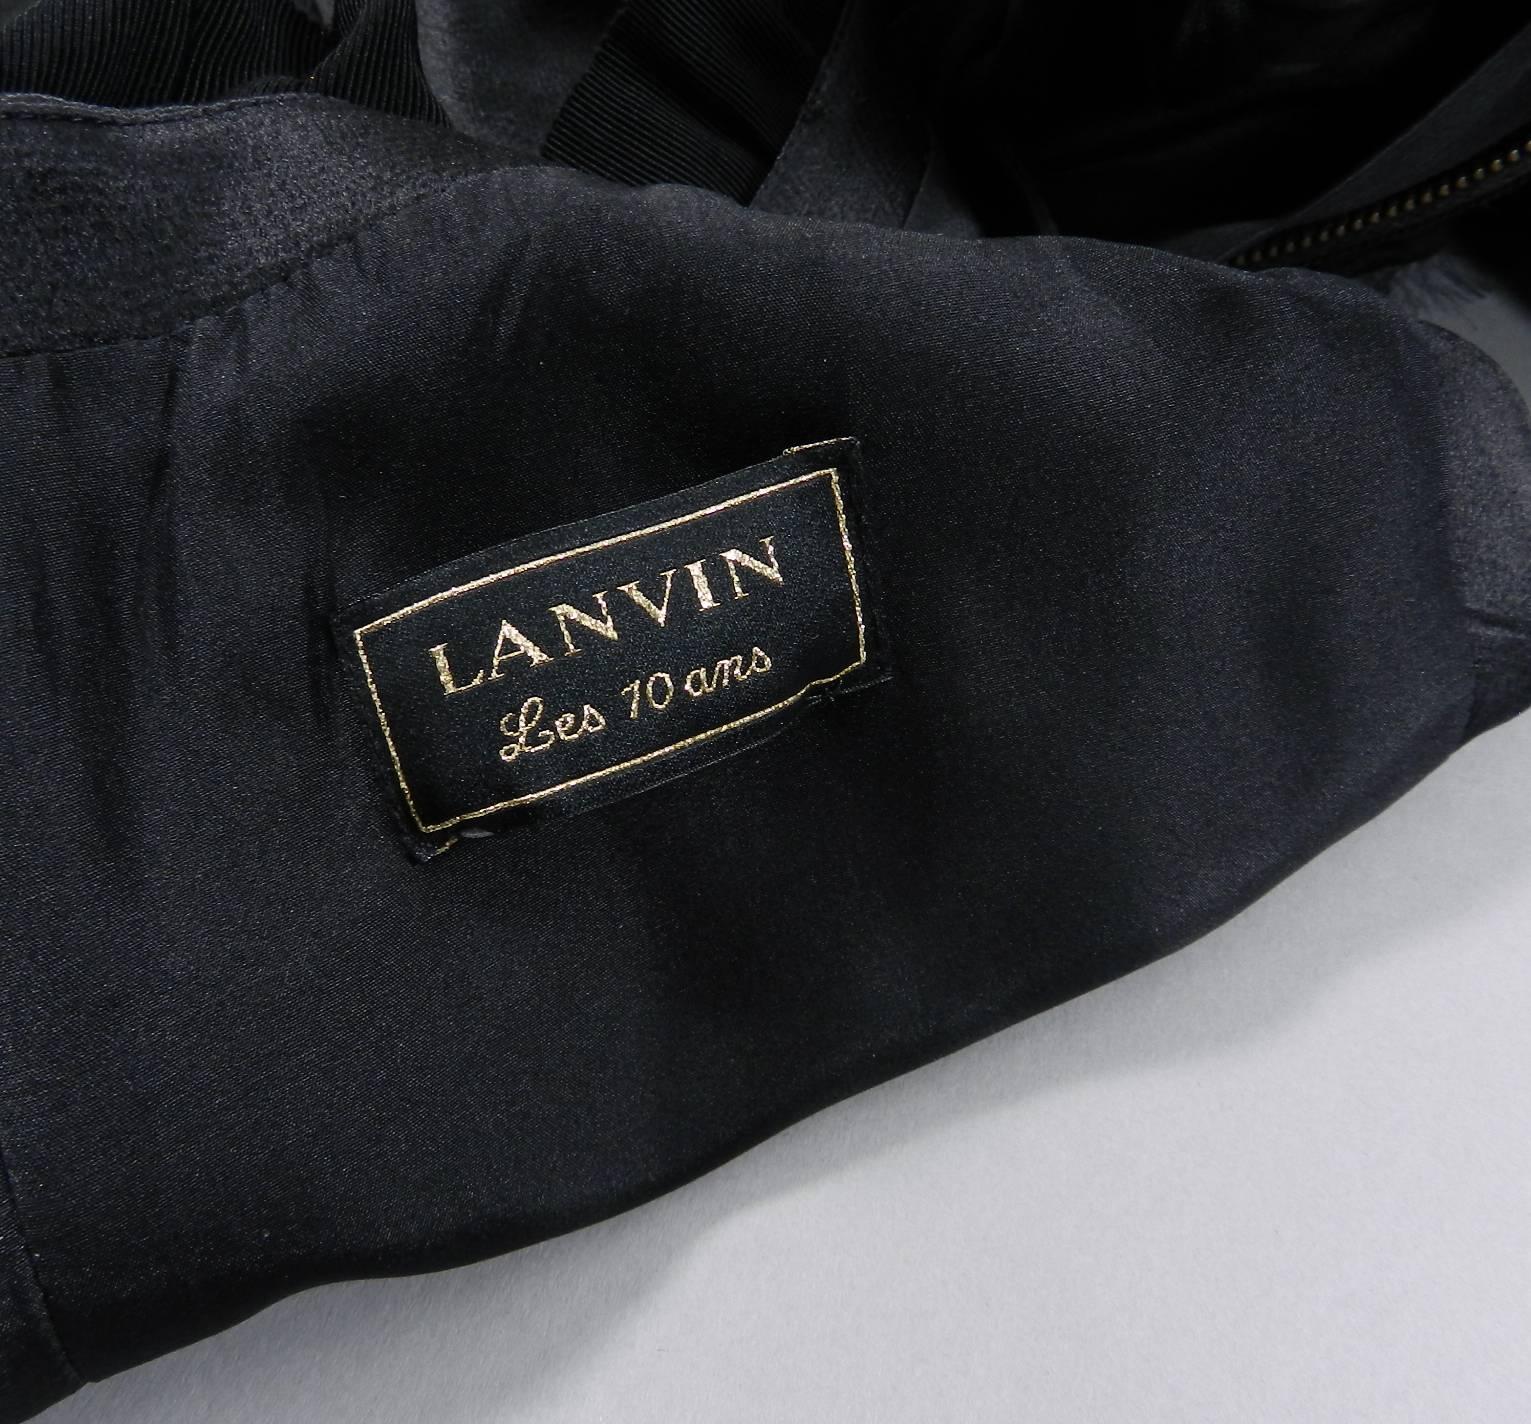 Lanvin Black Satin Cocktail Dress with Pearls and Chains 1